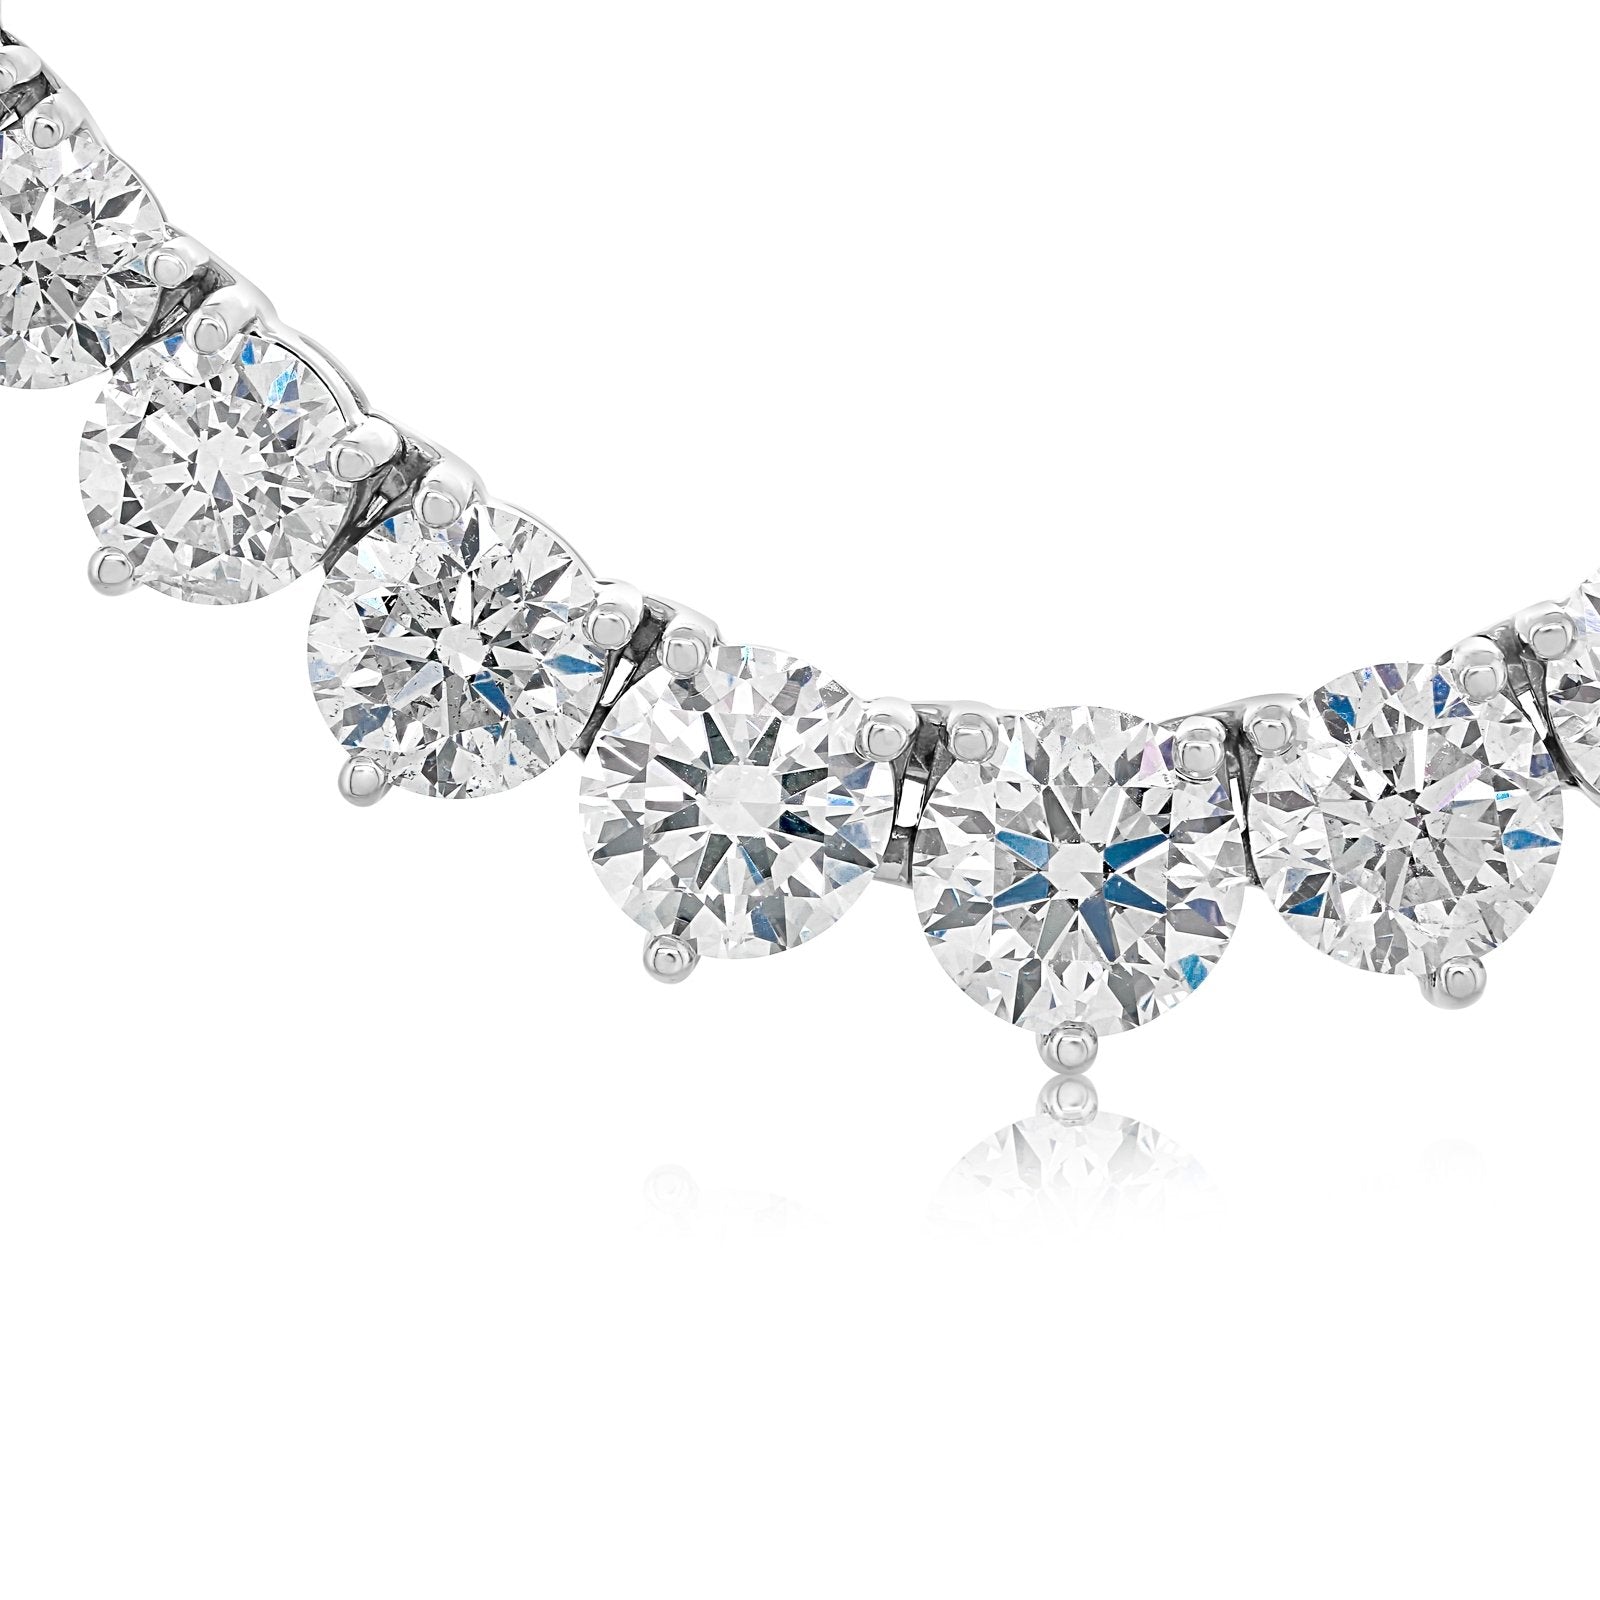 12 Carat Riviera Necklace - 2 For Sale on 1stDibs | 12 carat diamond  necklace, 12 carat necklace